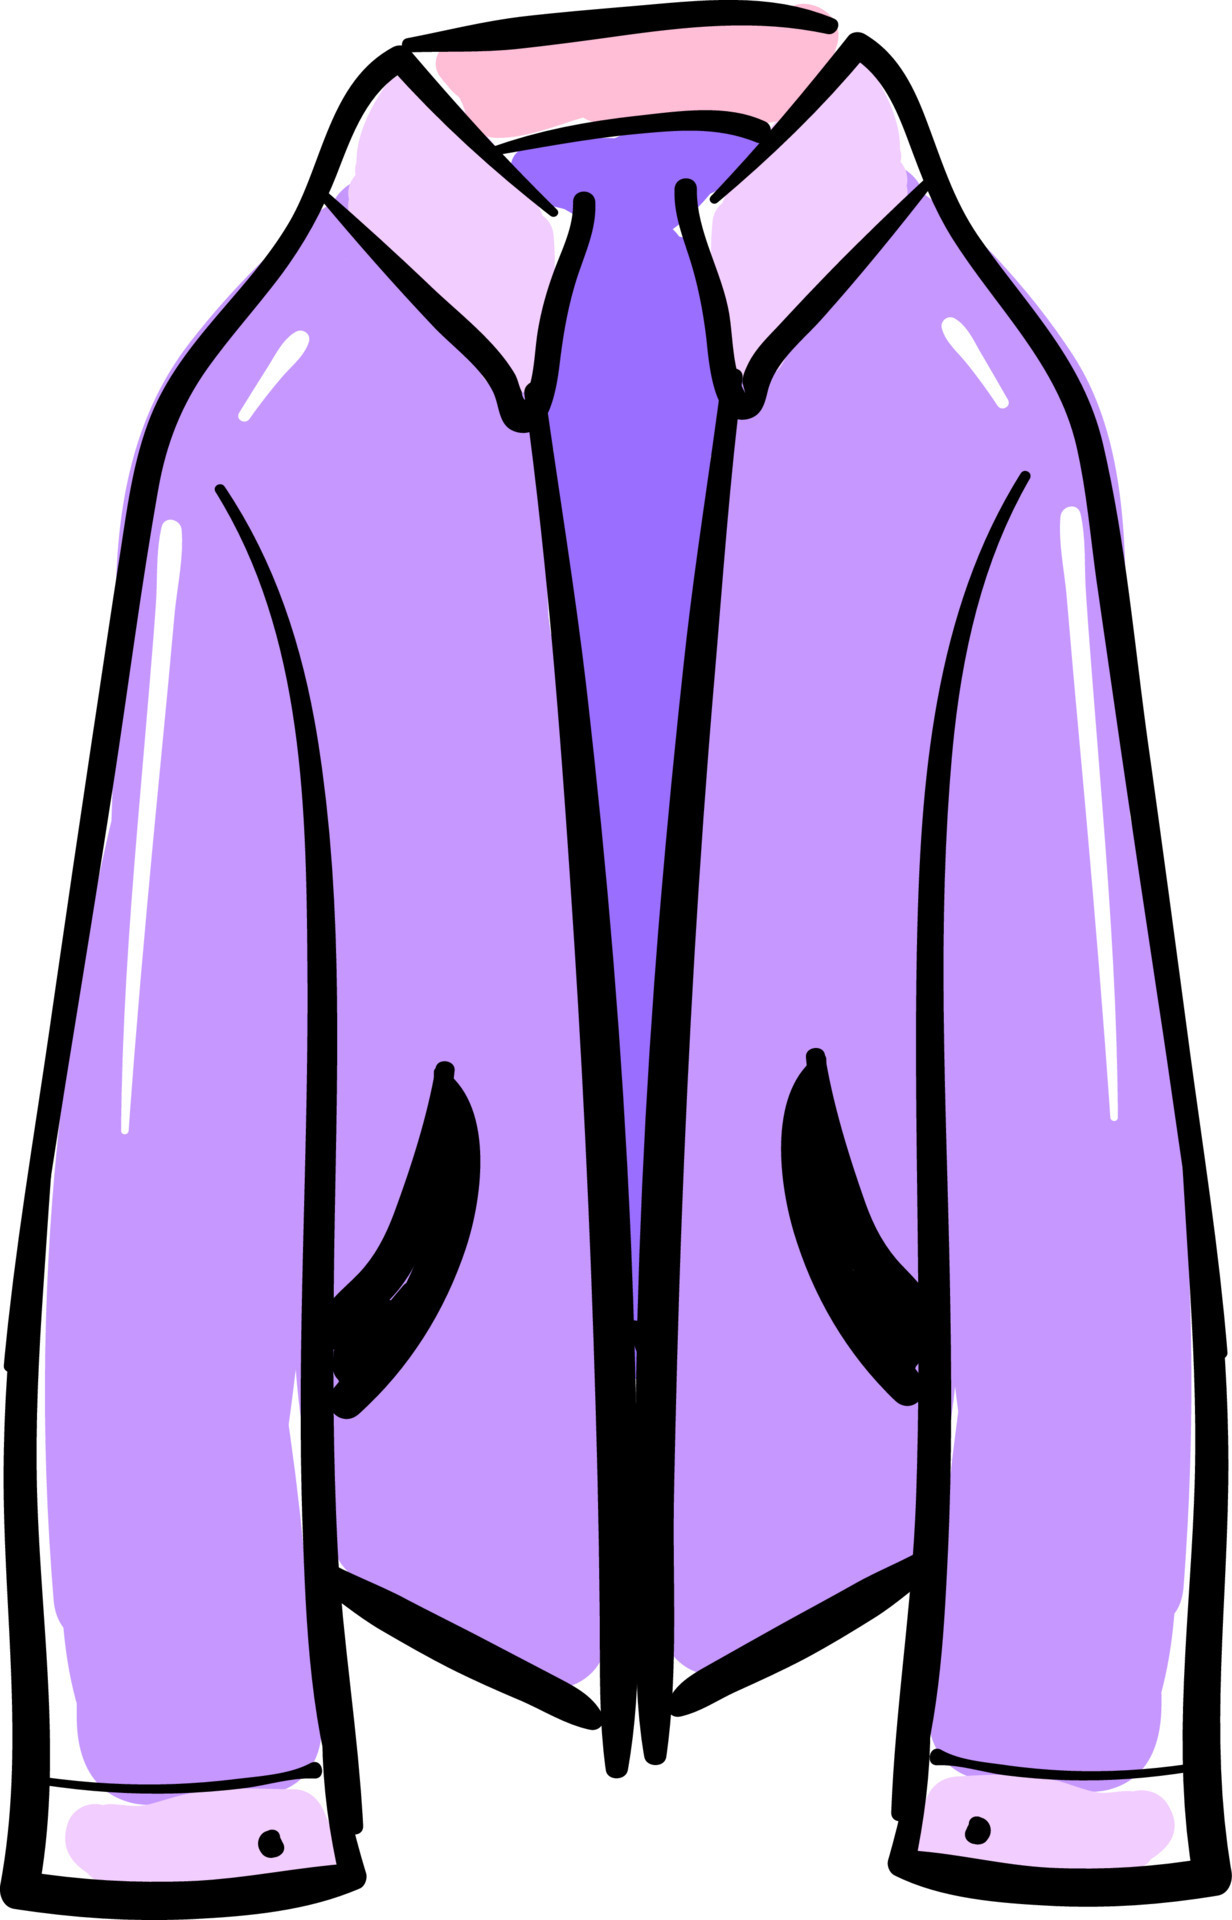 https://static.vecteezy.com/system/resources/previews/013/724/413/original/purple-jacket-illustration-on-white-background-free-vector.jpg